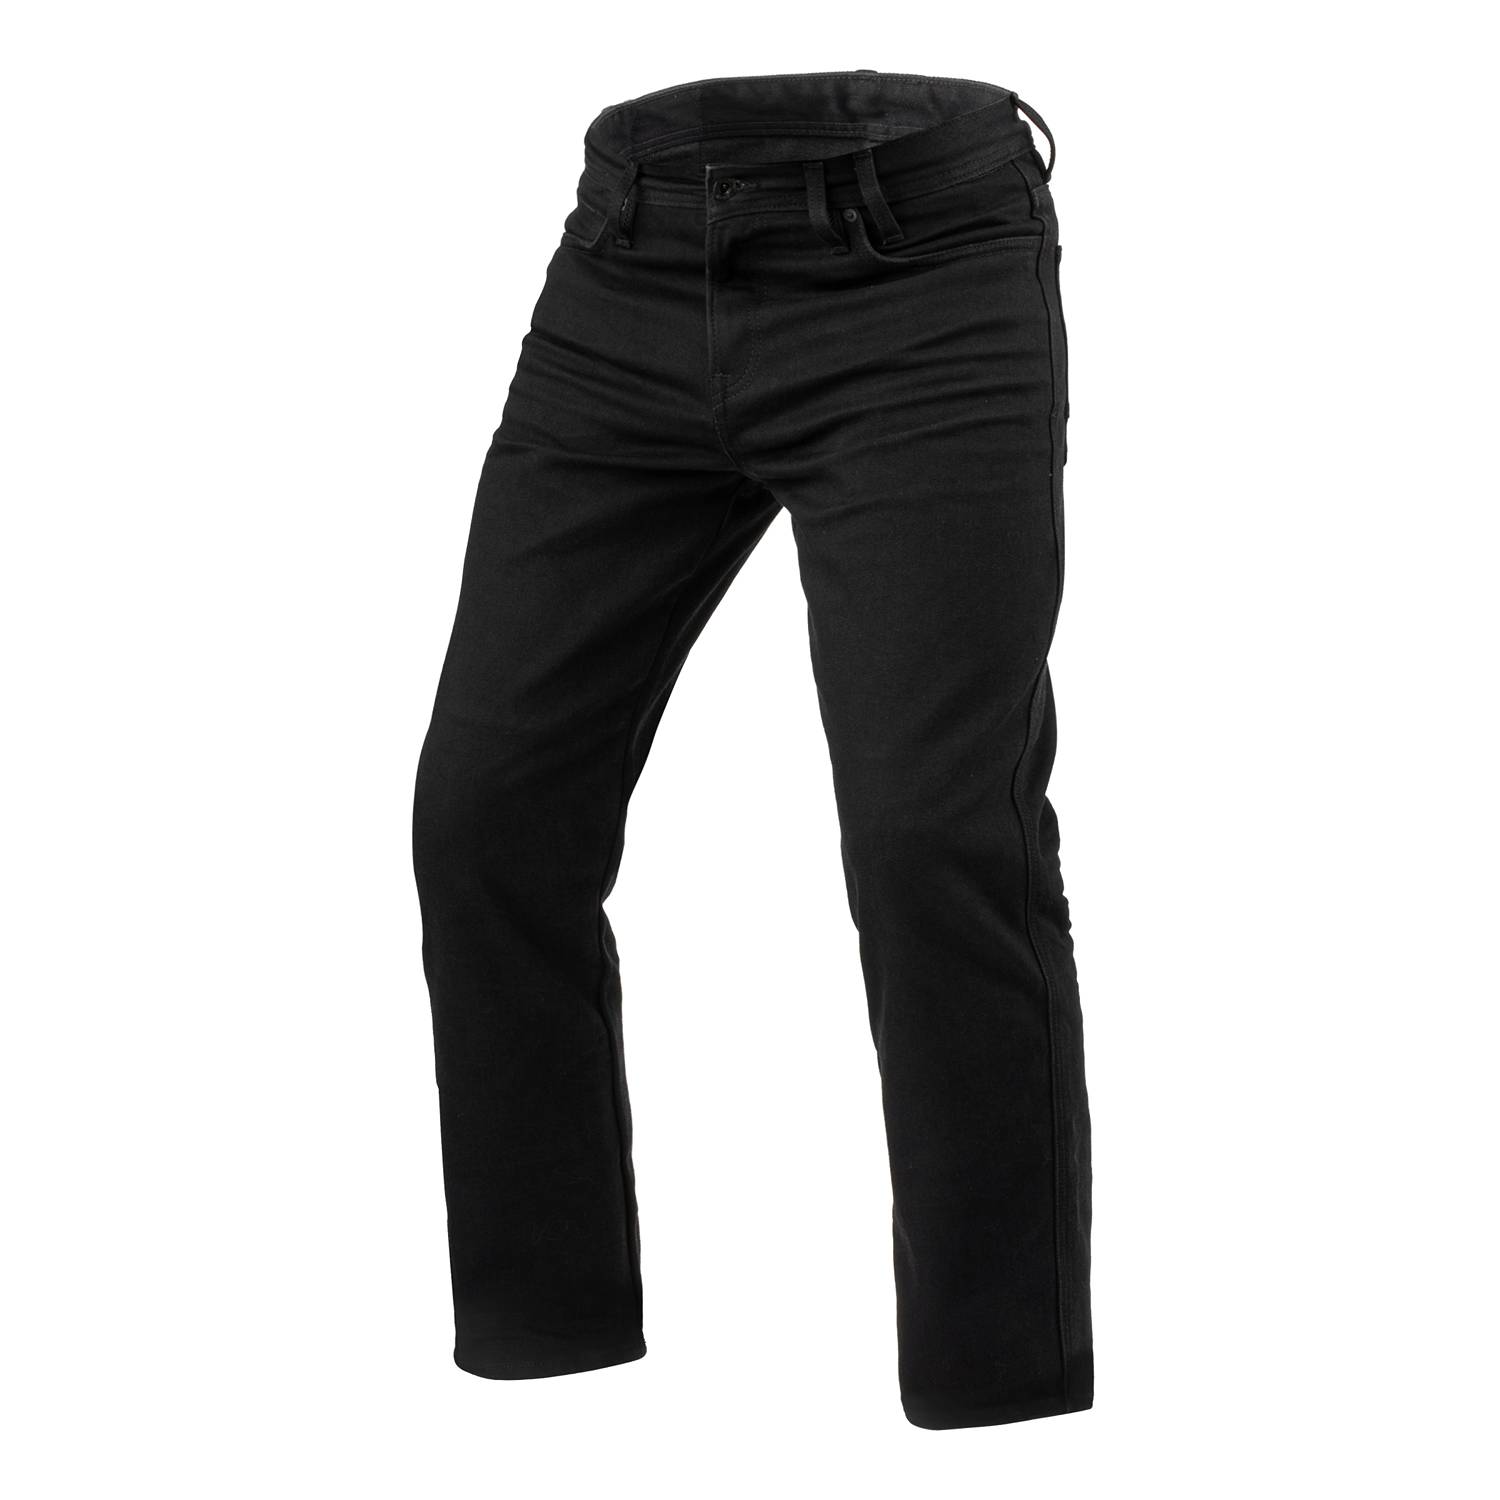 Image of REV'IT! Jeans Lombard 3 RF Black L32 Motorcycle Jeans Taille L32/W31